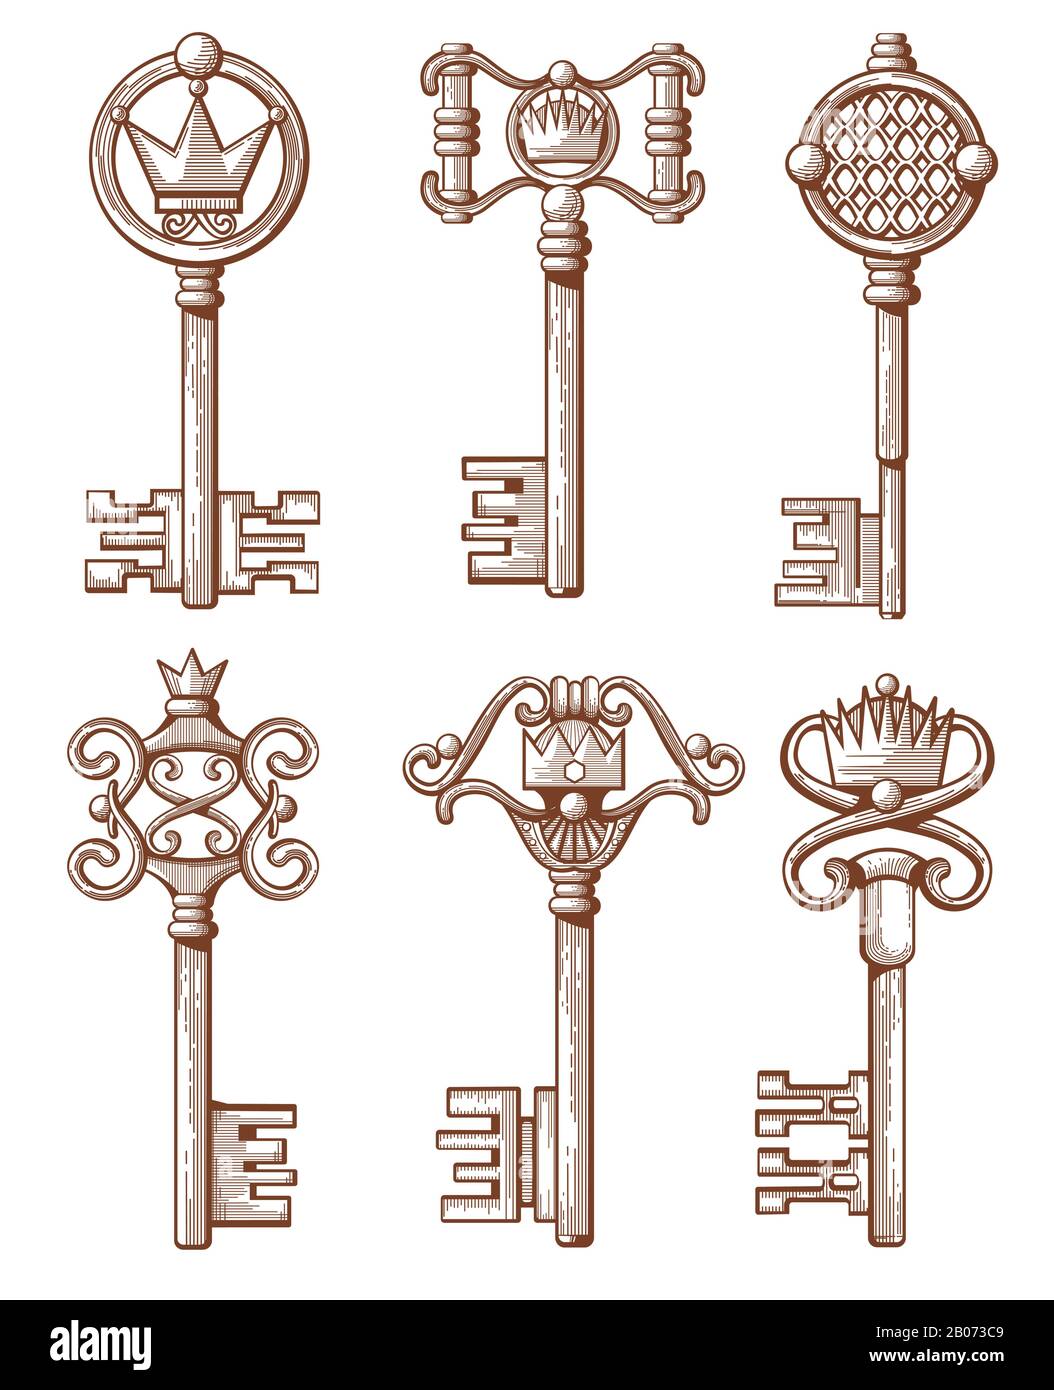 Retro old keys vector illustration in hand drawn style. Set of keys with crown Stock Vector